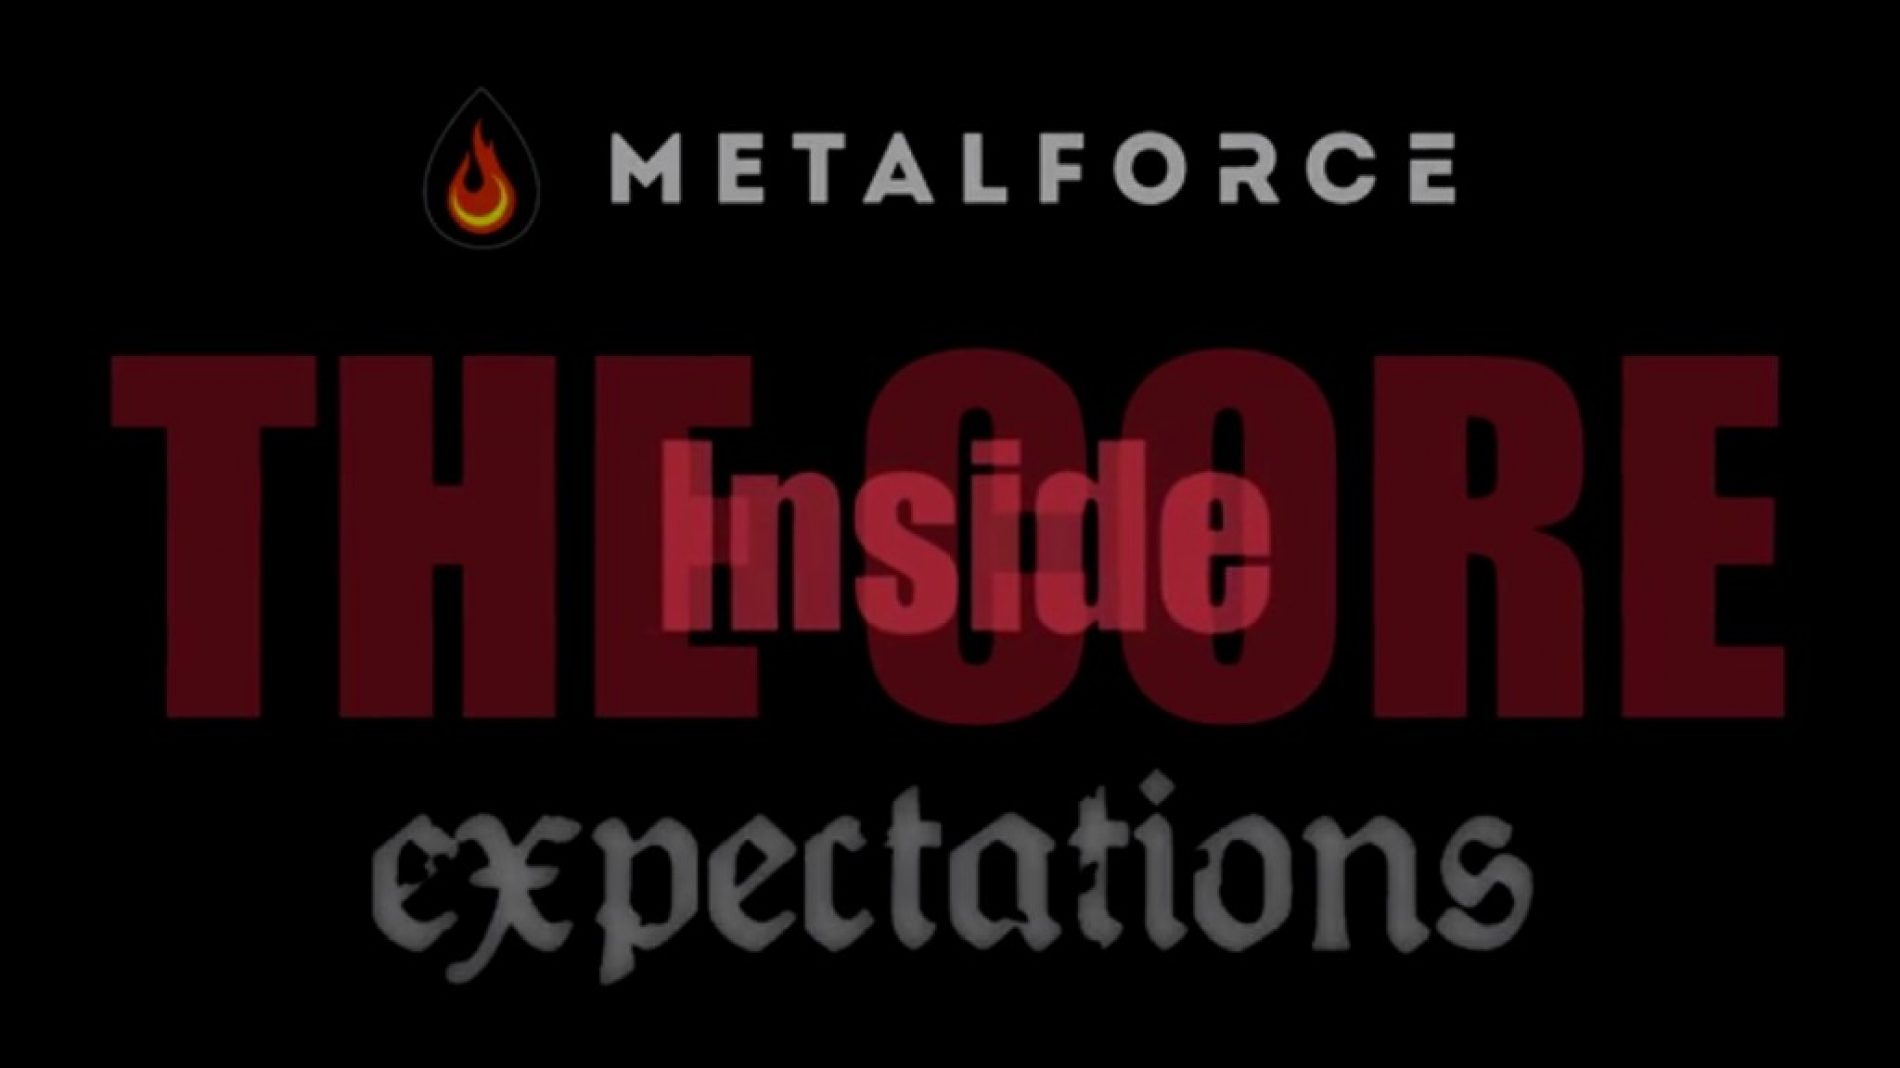 Inside The CORE #3: Expectations (Interviu Metalforce)